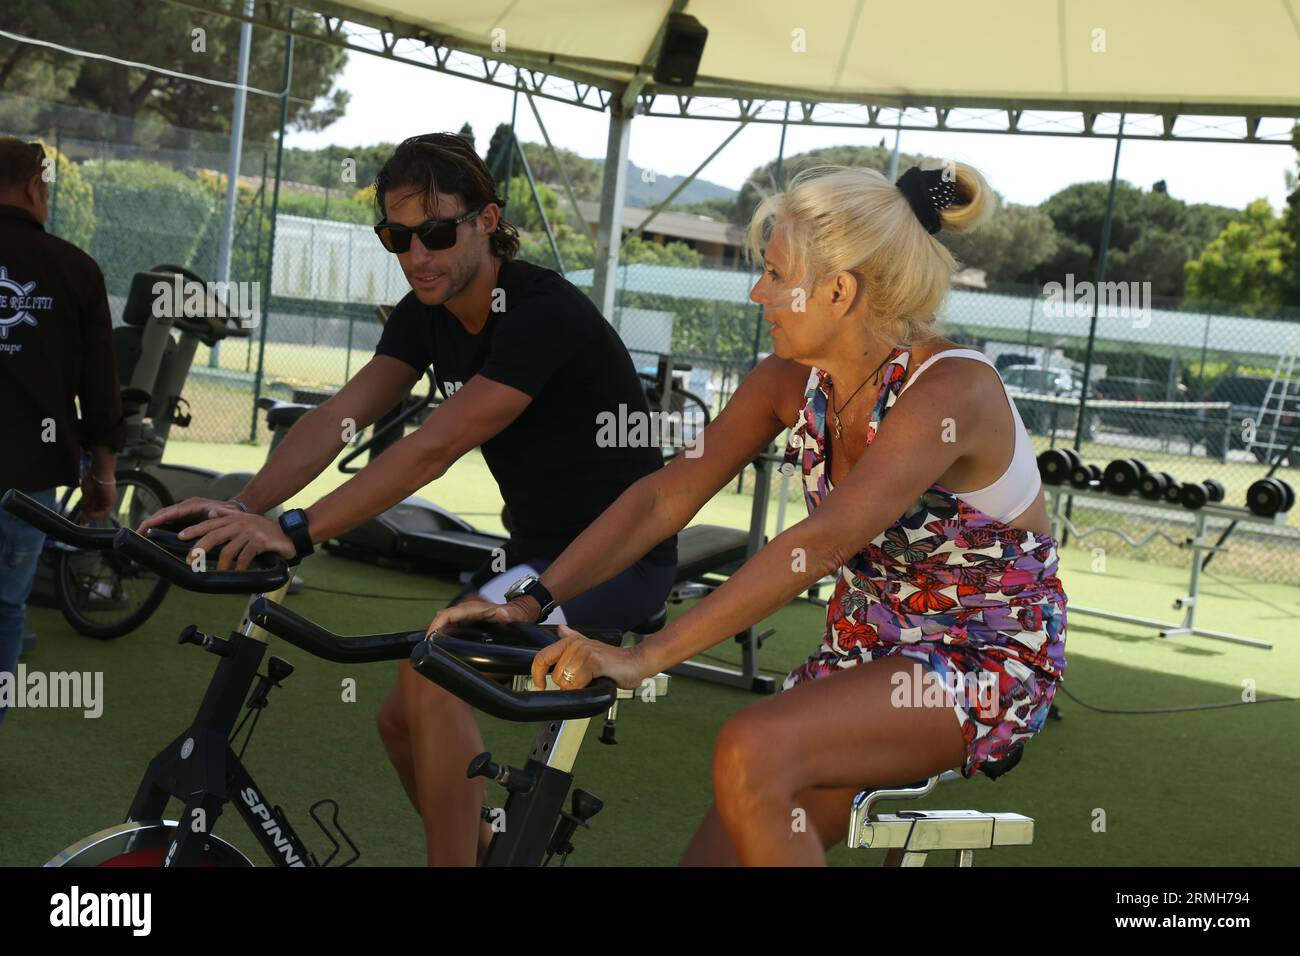 Maria Teresa Ruta Italian Famous Italian television presenter, journalist and writer, cycling on a cyclette with personal trainer for a tv show Stock Photo